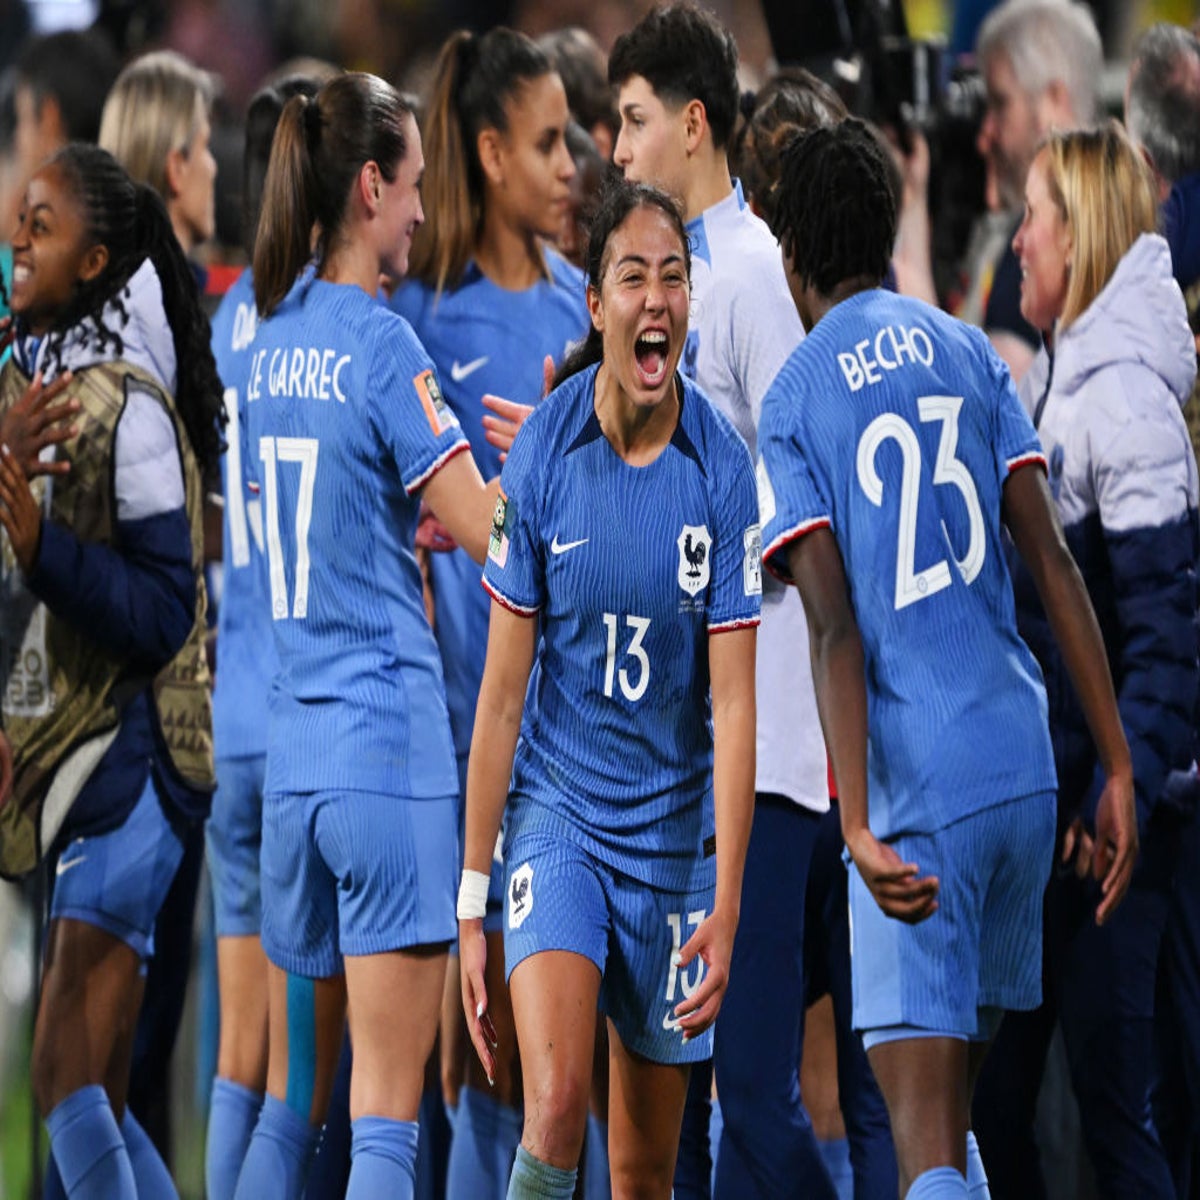 France vs Brazil: How can I watch Women's World Cup game for FREE on TV in  UK today?